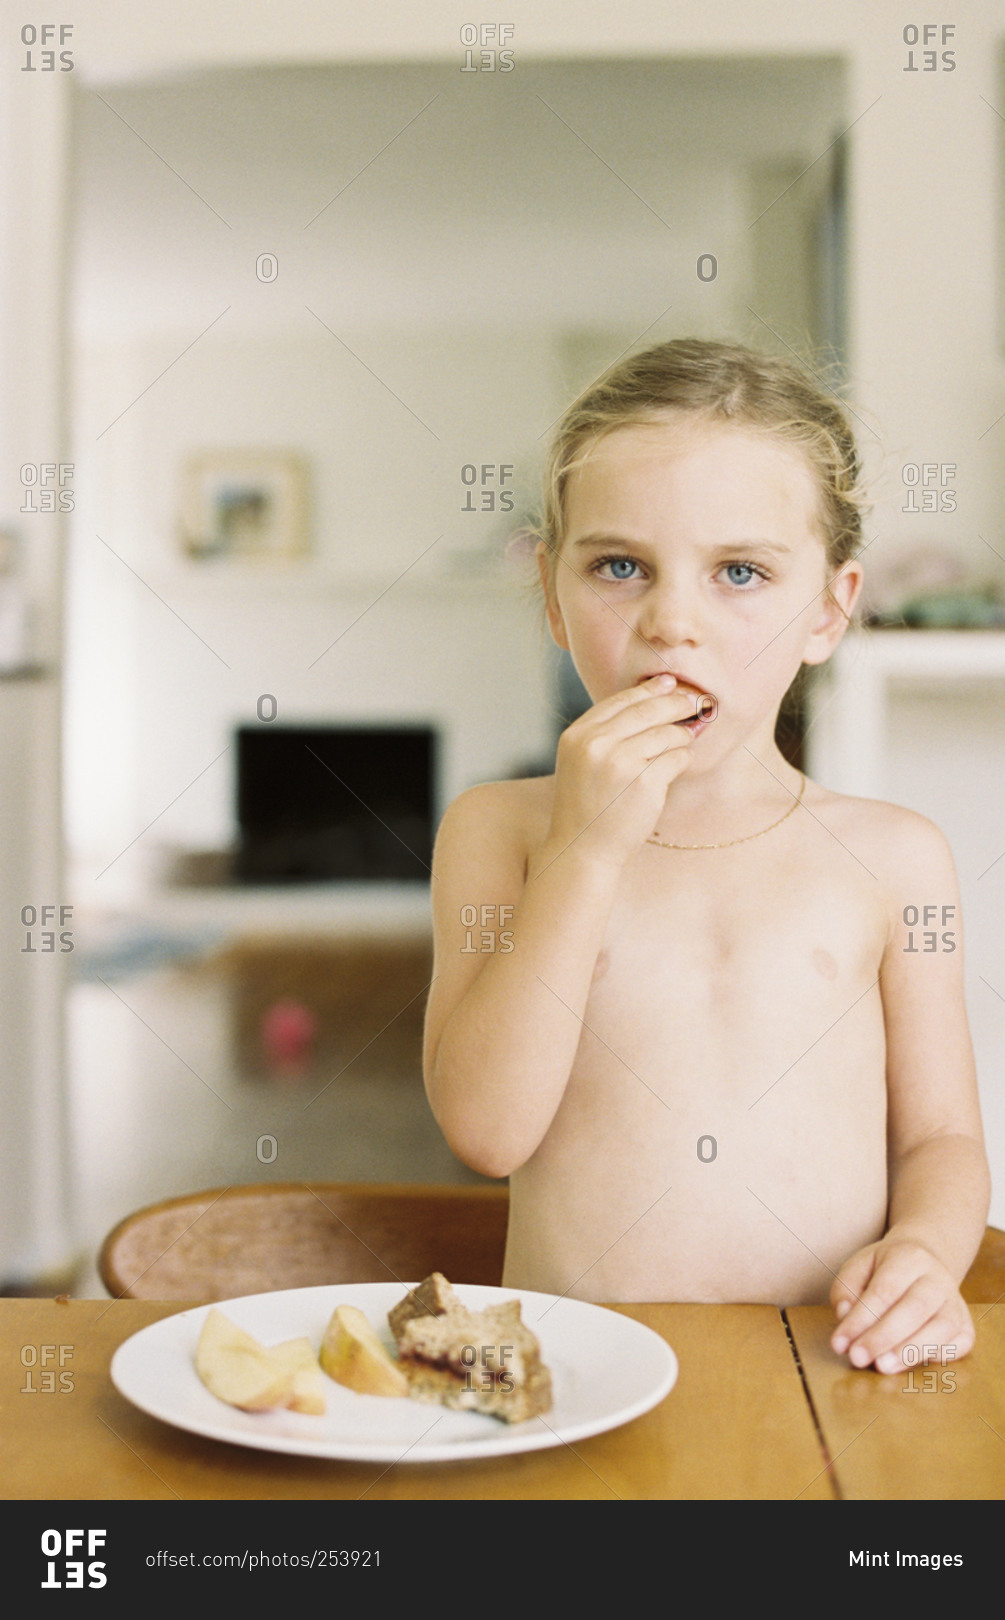 Nude Young Girl Standing At A Table Eating A Sandwich And A